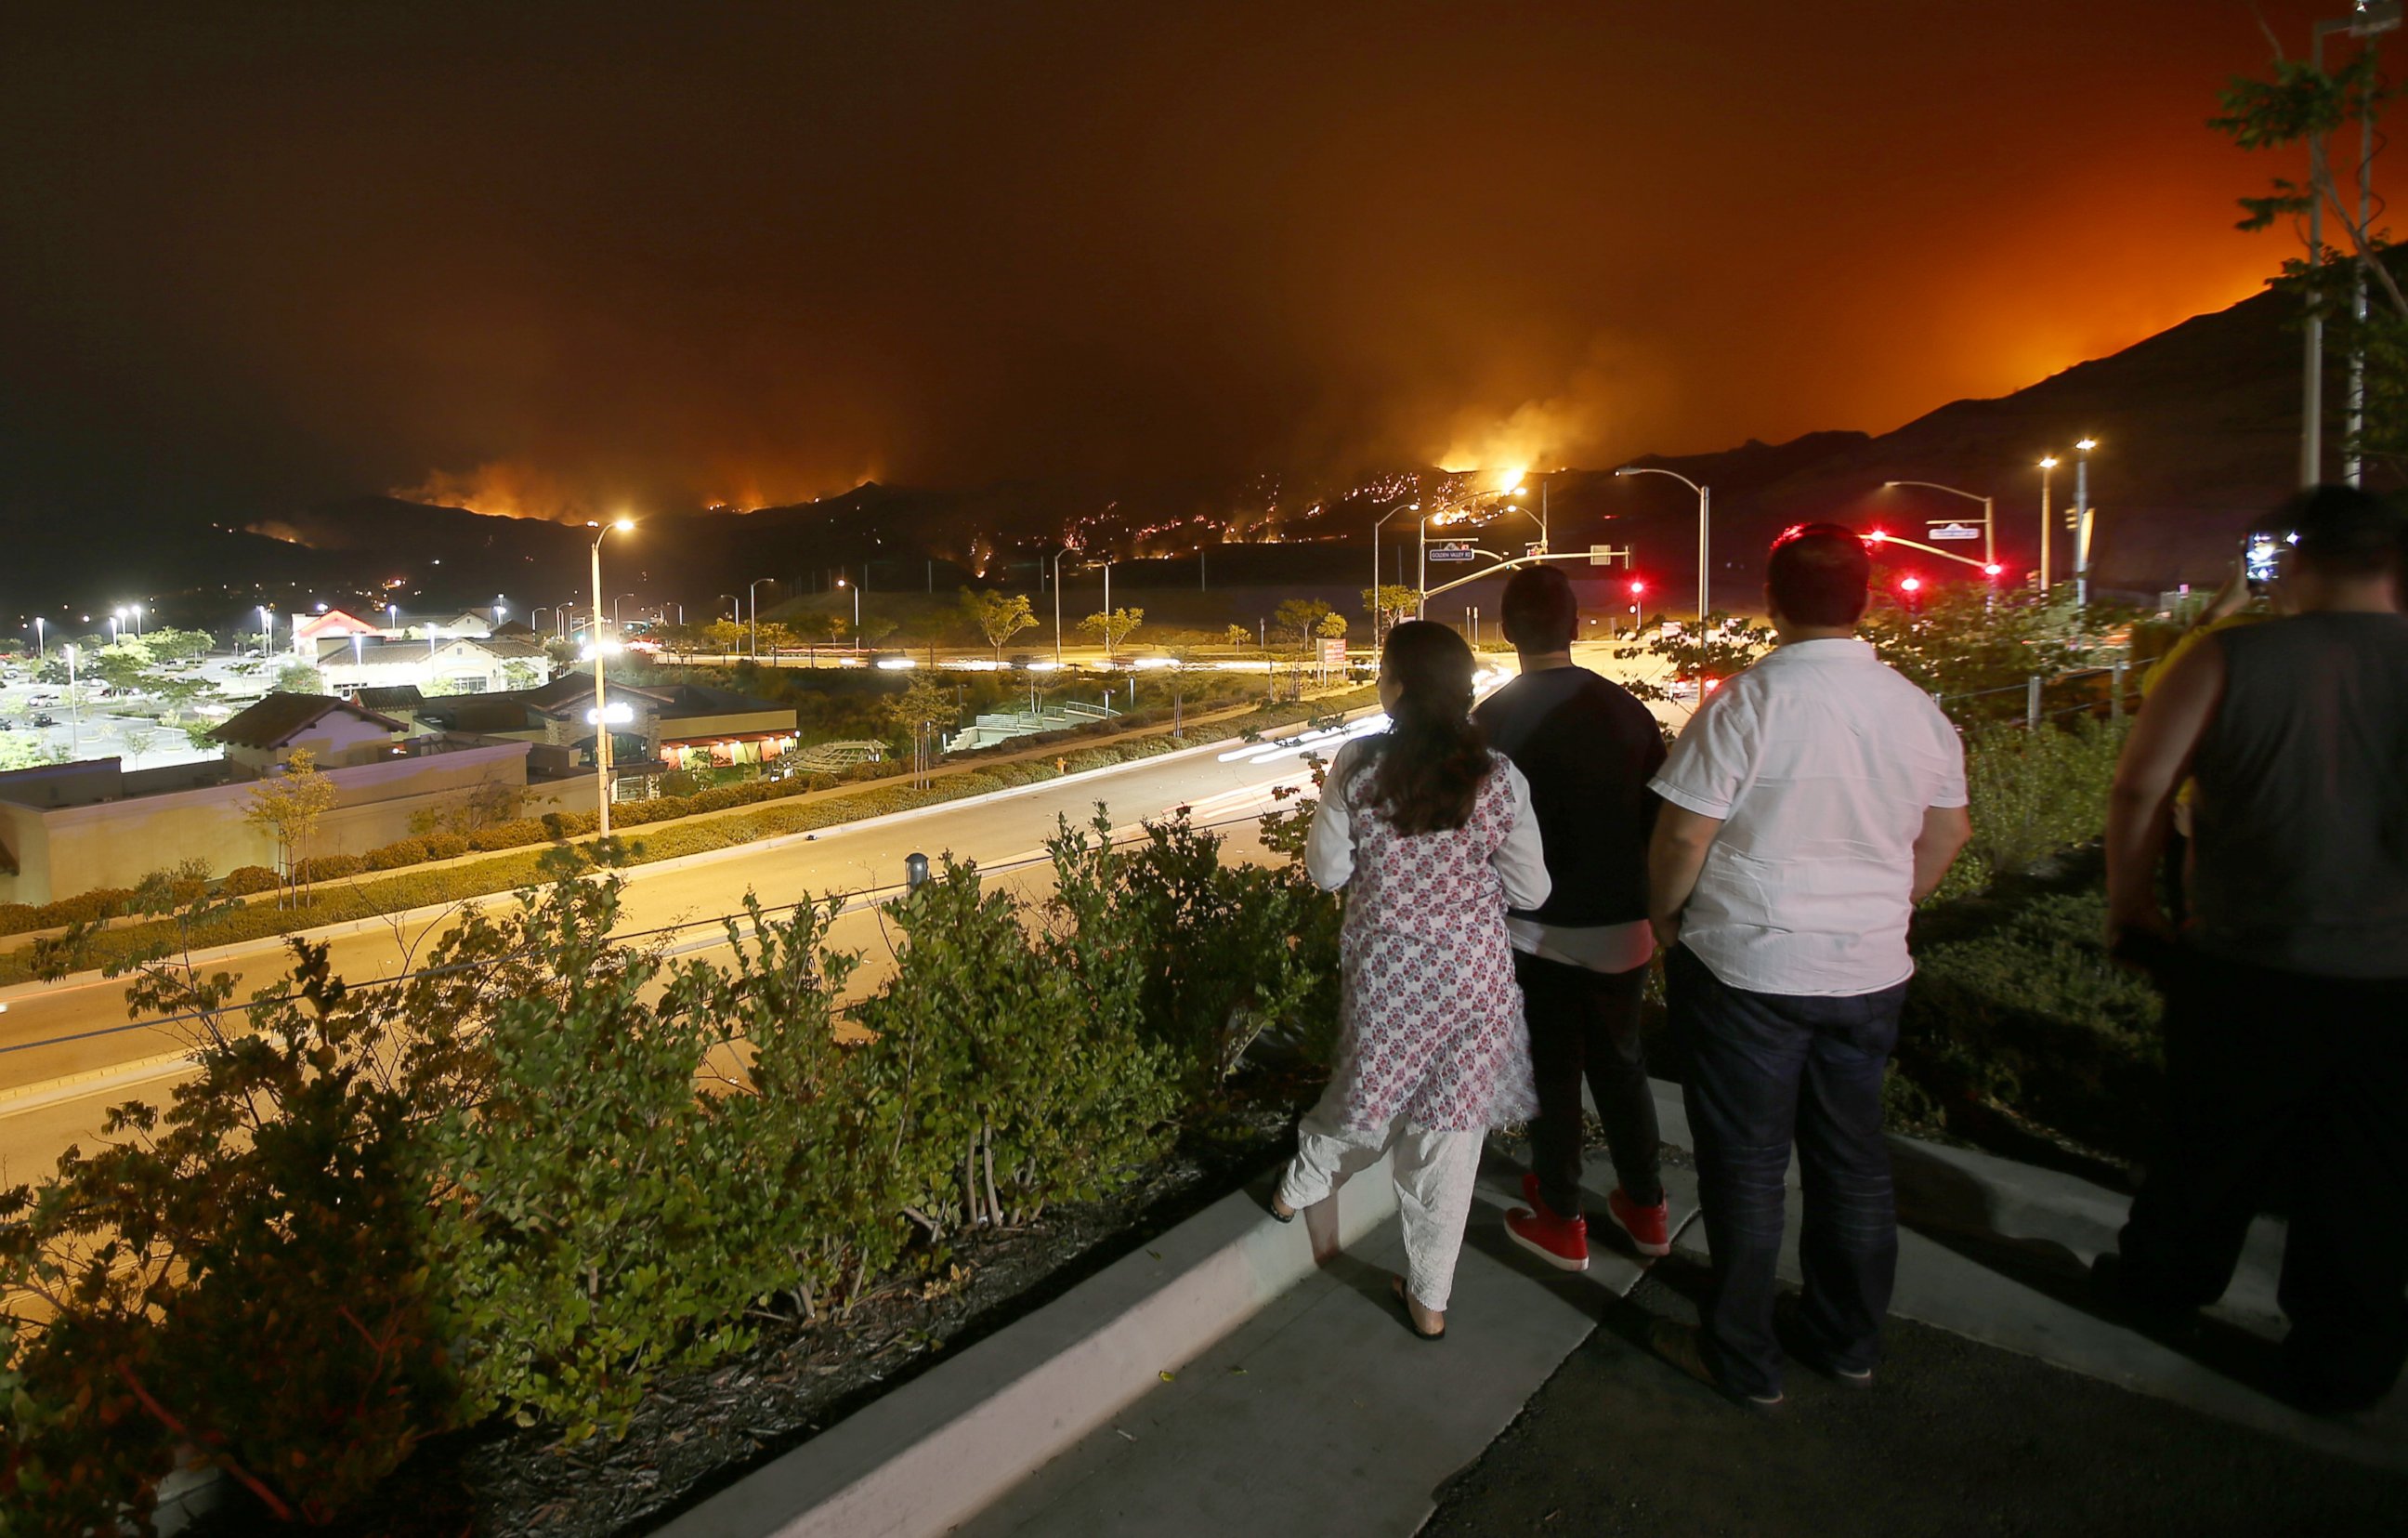 PHOTO: Onlookers gather at the parking lot of a shopping mall along Golden Valley Road in Santa Clarita to watch the Sand fire burn in the hills above the city on July 24, 2016.